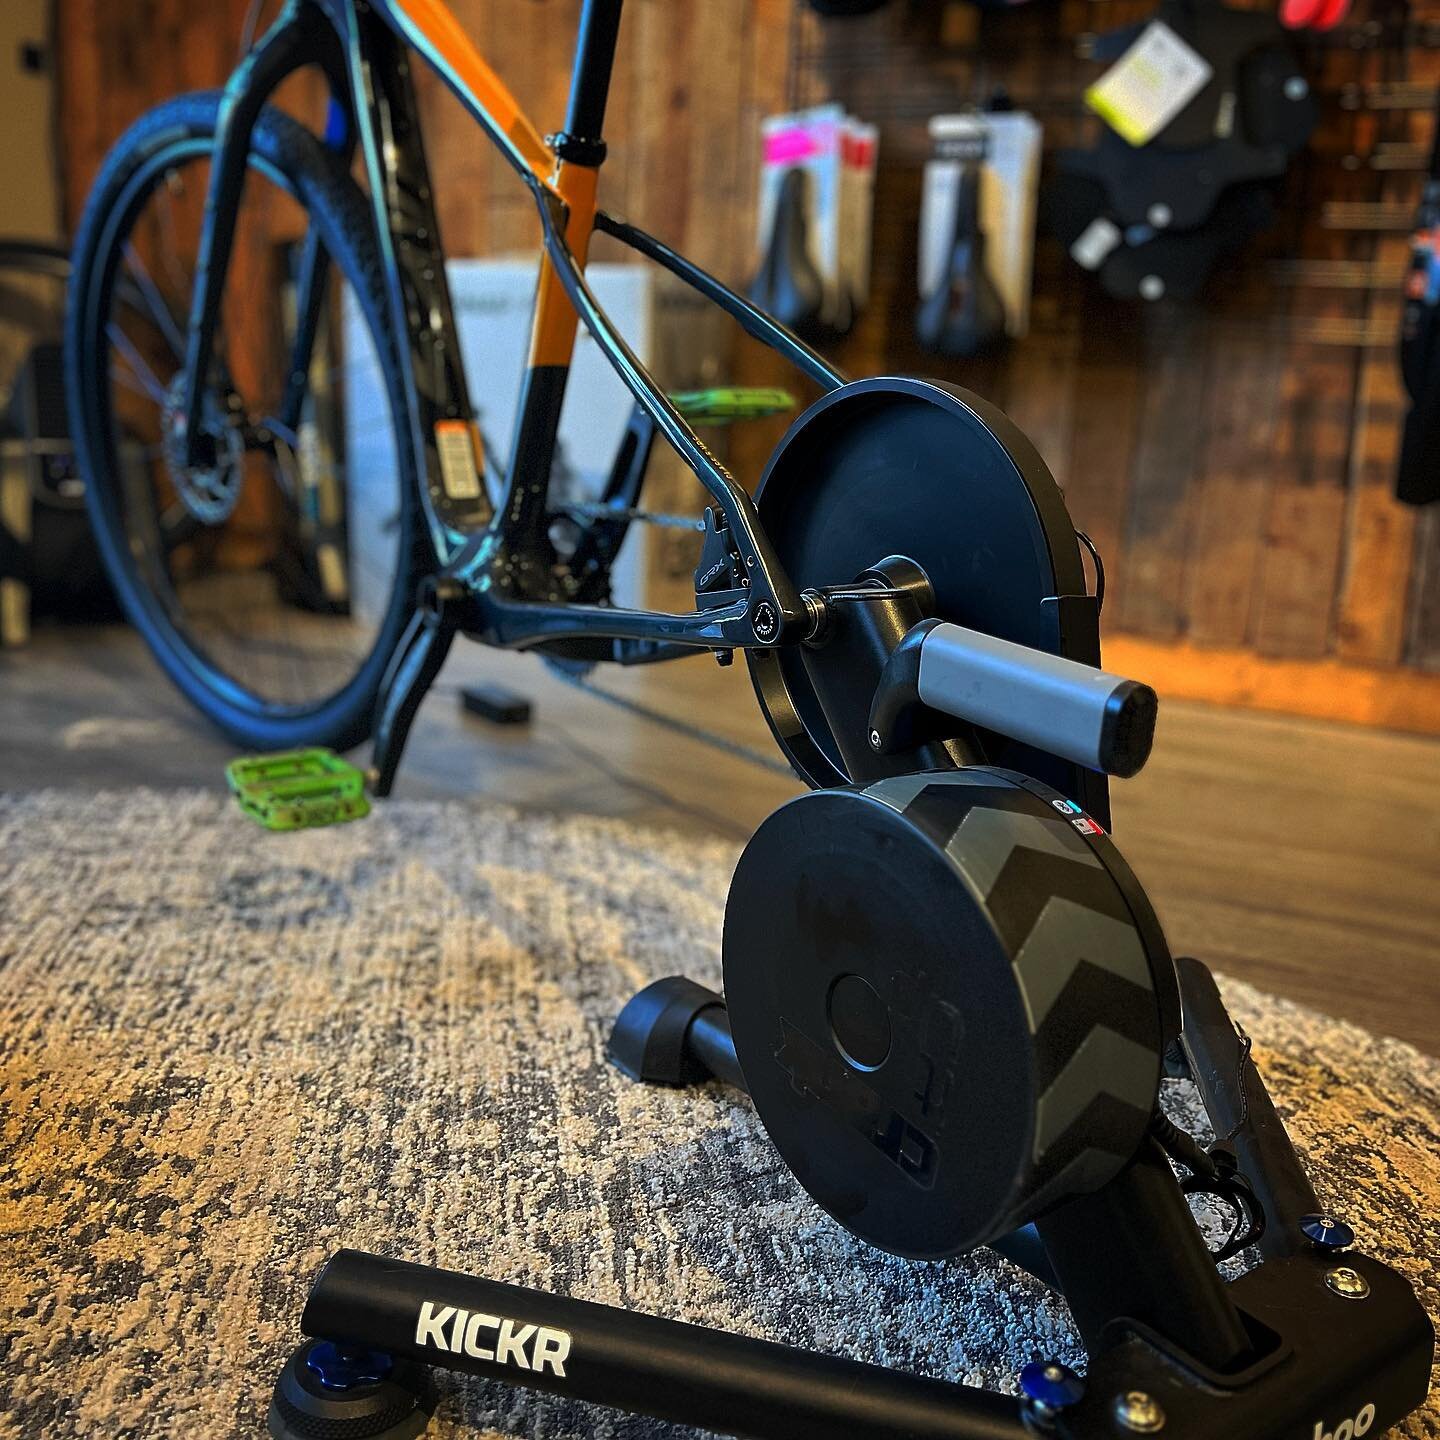 Be ready for trainer season and jump on the best product on the market. @wahoofitnessofficial KICKR available in store. 

#fitzgeraldsbicycles #communitybikeshop #jacksonhole #tetonvalley #idahofalls #wahooligan